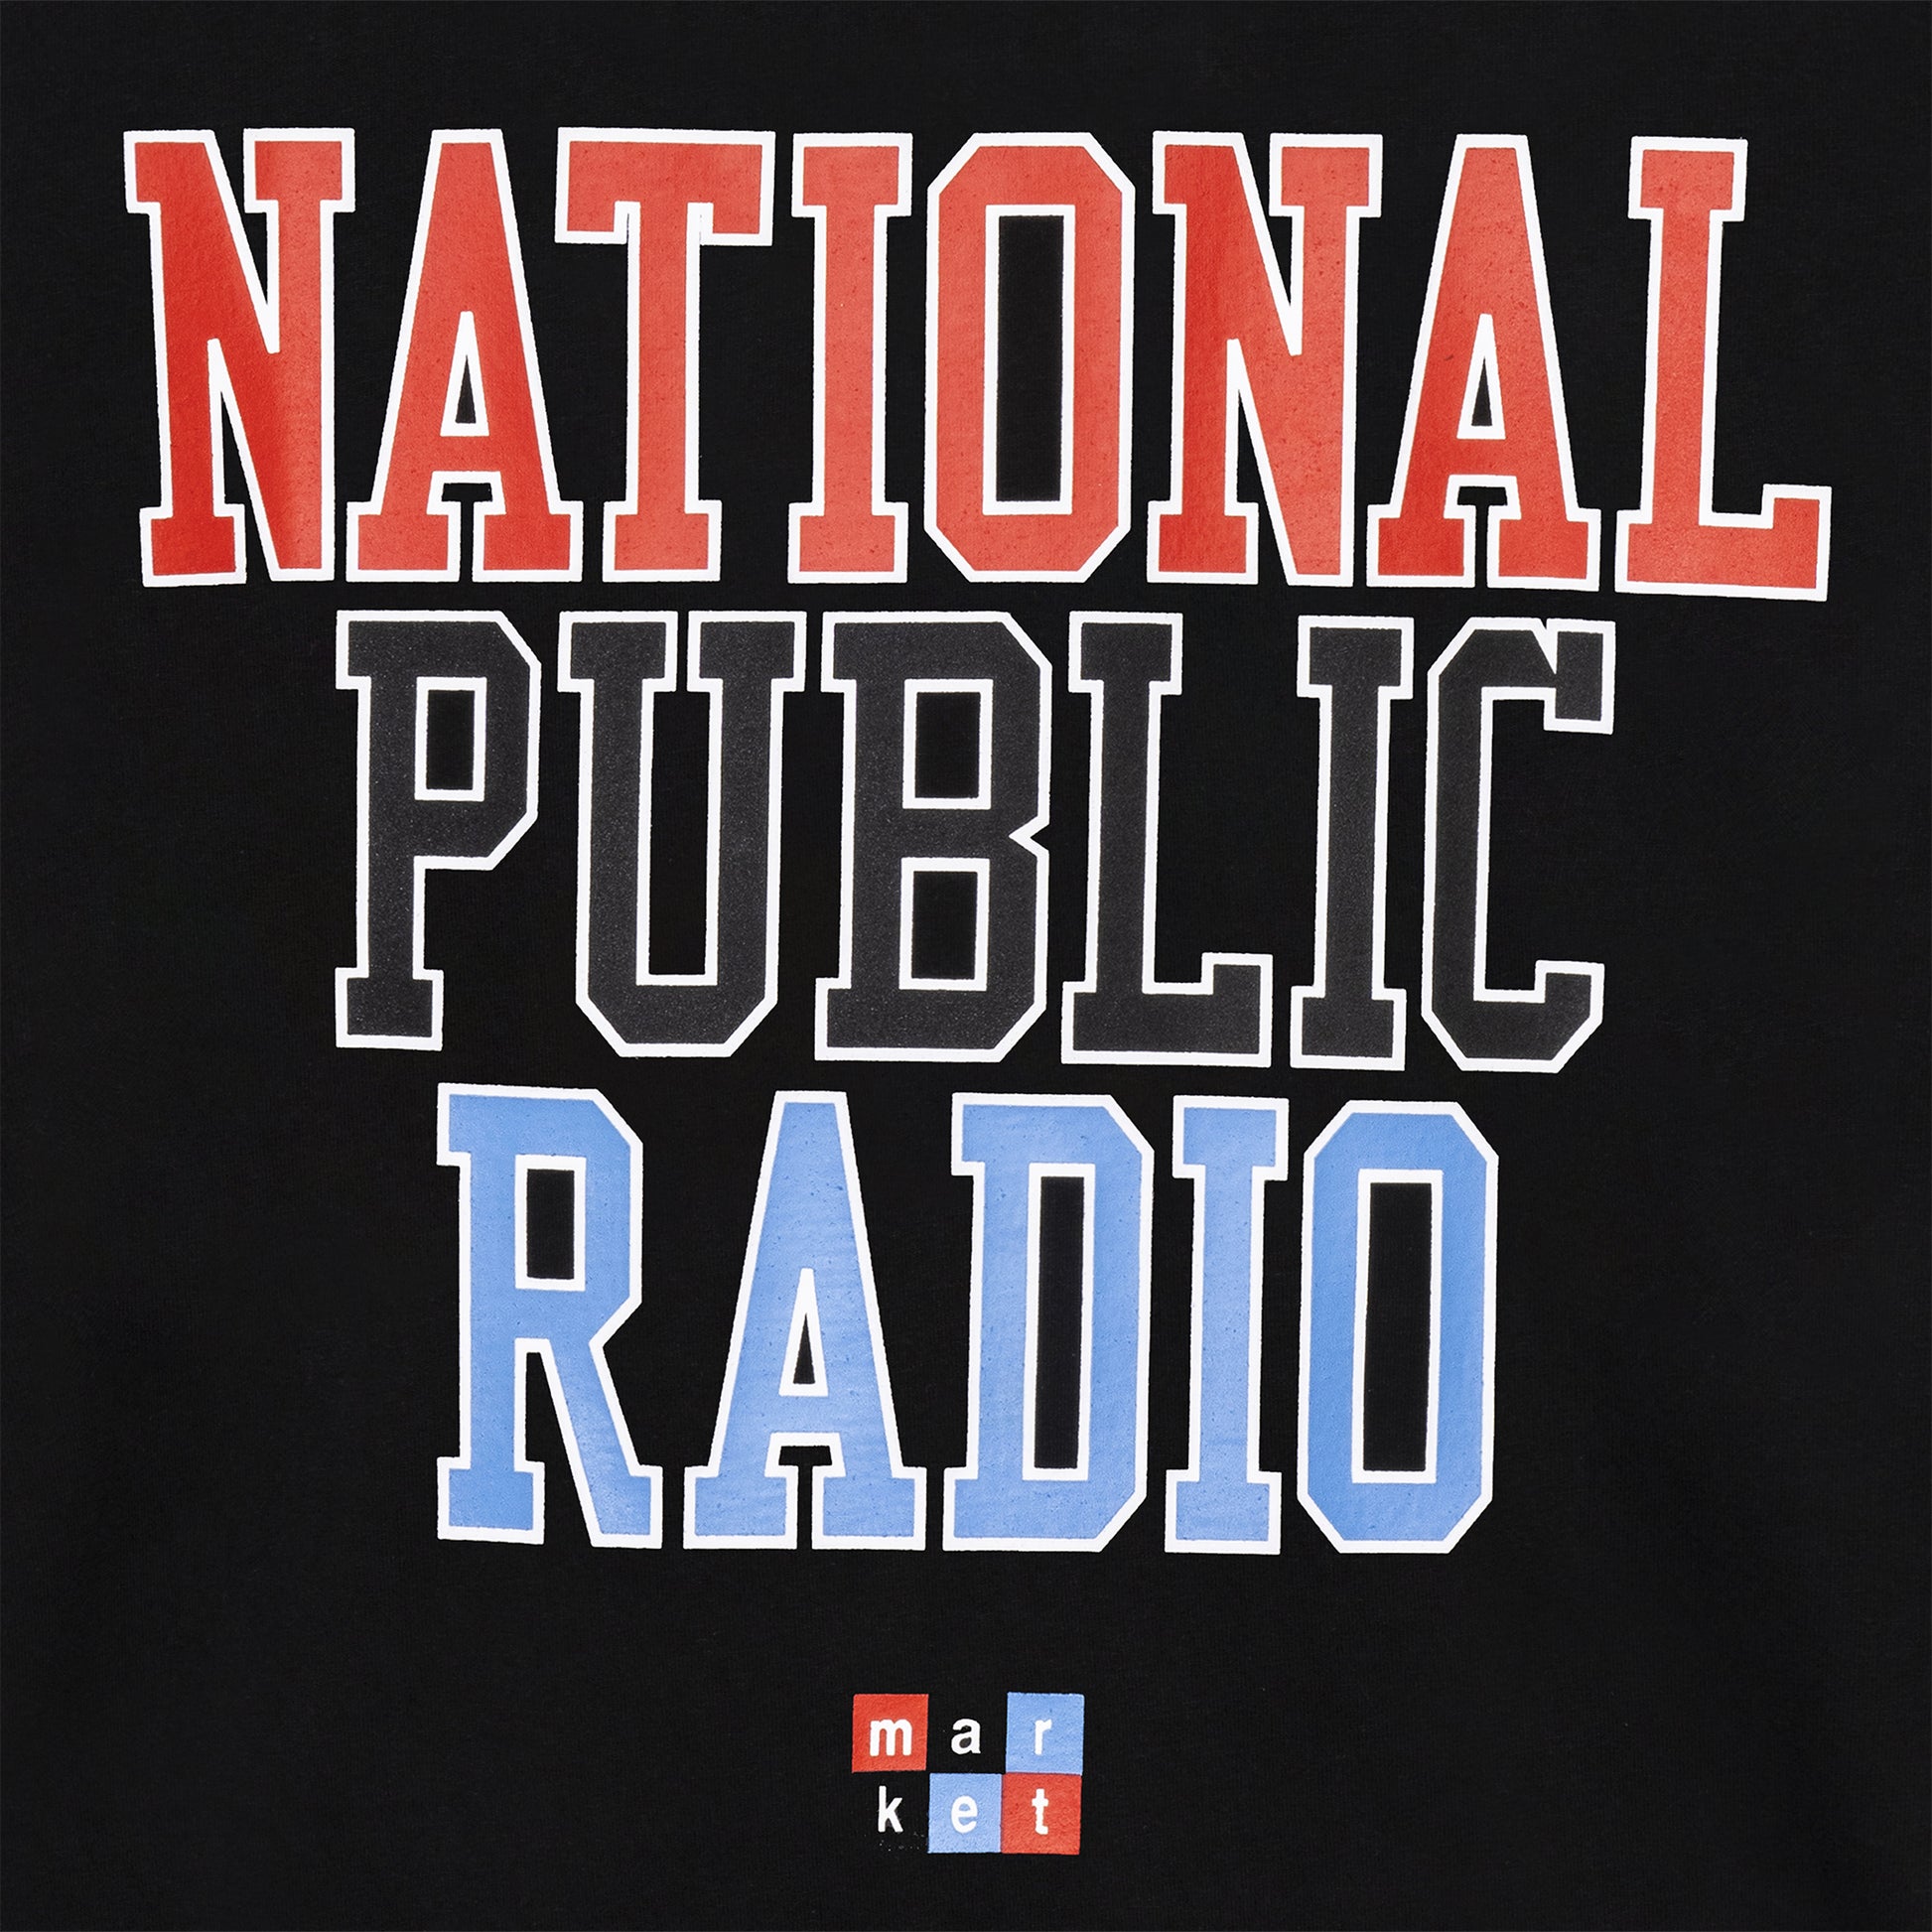 MARKET clothing brand NPR FACTS T-SHIRT. Find more graphic tees, hats, hoodies and more at MarketStudios.com. Formally Chinatown Market.